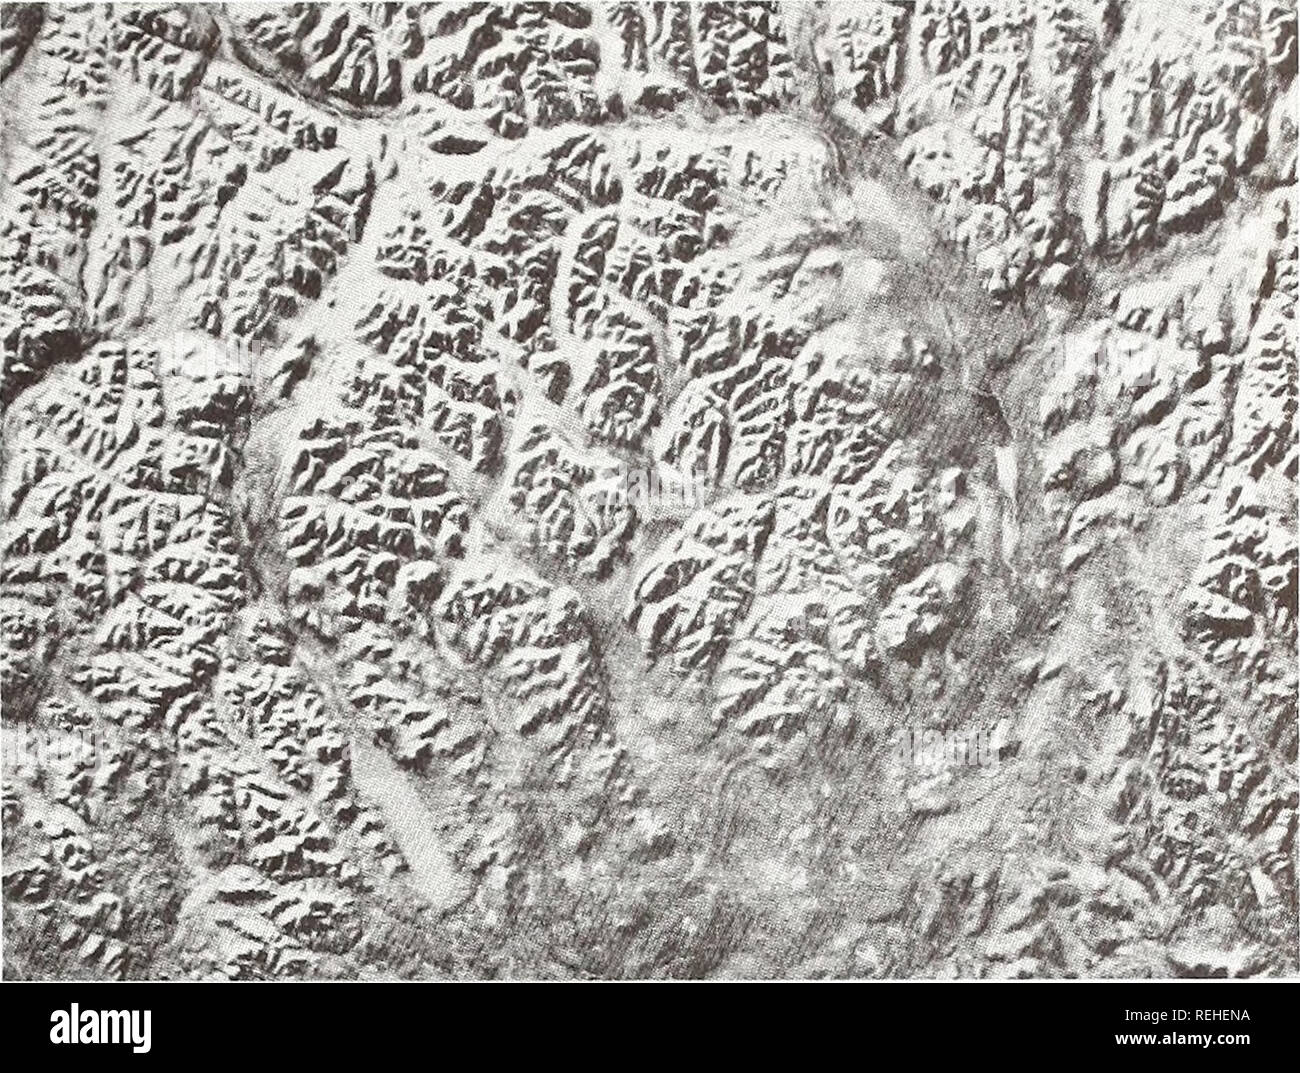 . Collected reprints / Atlantic Oceanographic and Meteorological Laboratories [and] Pacific Oceanographic Laboratories. Oceanography Periodicals.. Fig. 1 Labynkyr ring, 65 km across. This is a possible astrobleme in western Siberia (63°N, 143° E) with the annular geomorphic style of Manicouagan in a maturely dissected plateau region of the Verkoyansk Mountains 2,000 m high. Image is inverted, south to the north, so that shadows fall toward the observer. Scale on all images is 1 cm equals approx. 10 km (ERTS scene #1097-1204).. Please note that these images are extracted from scanned page image Stock Photo